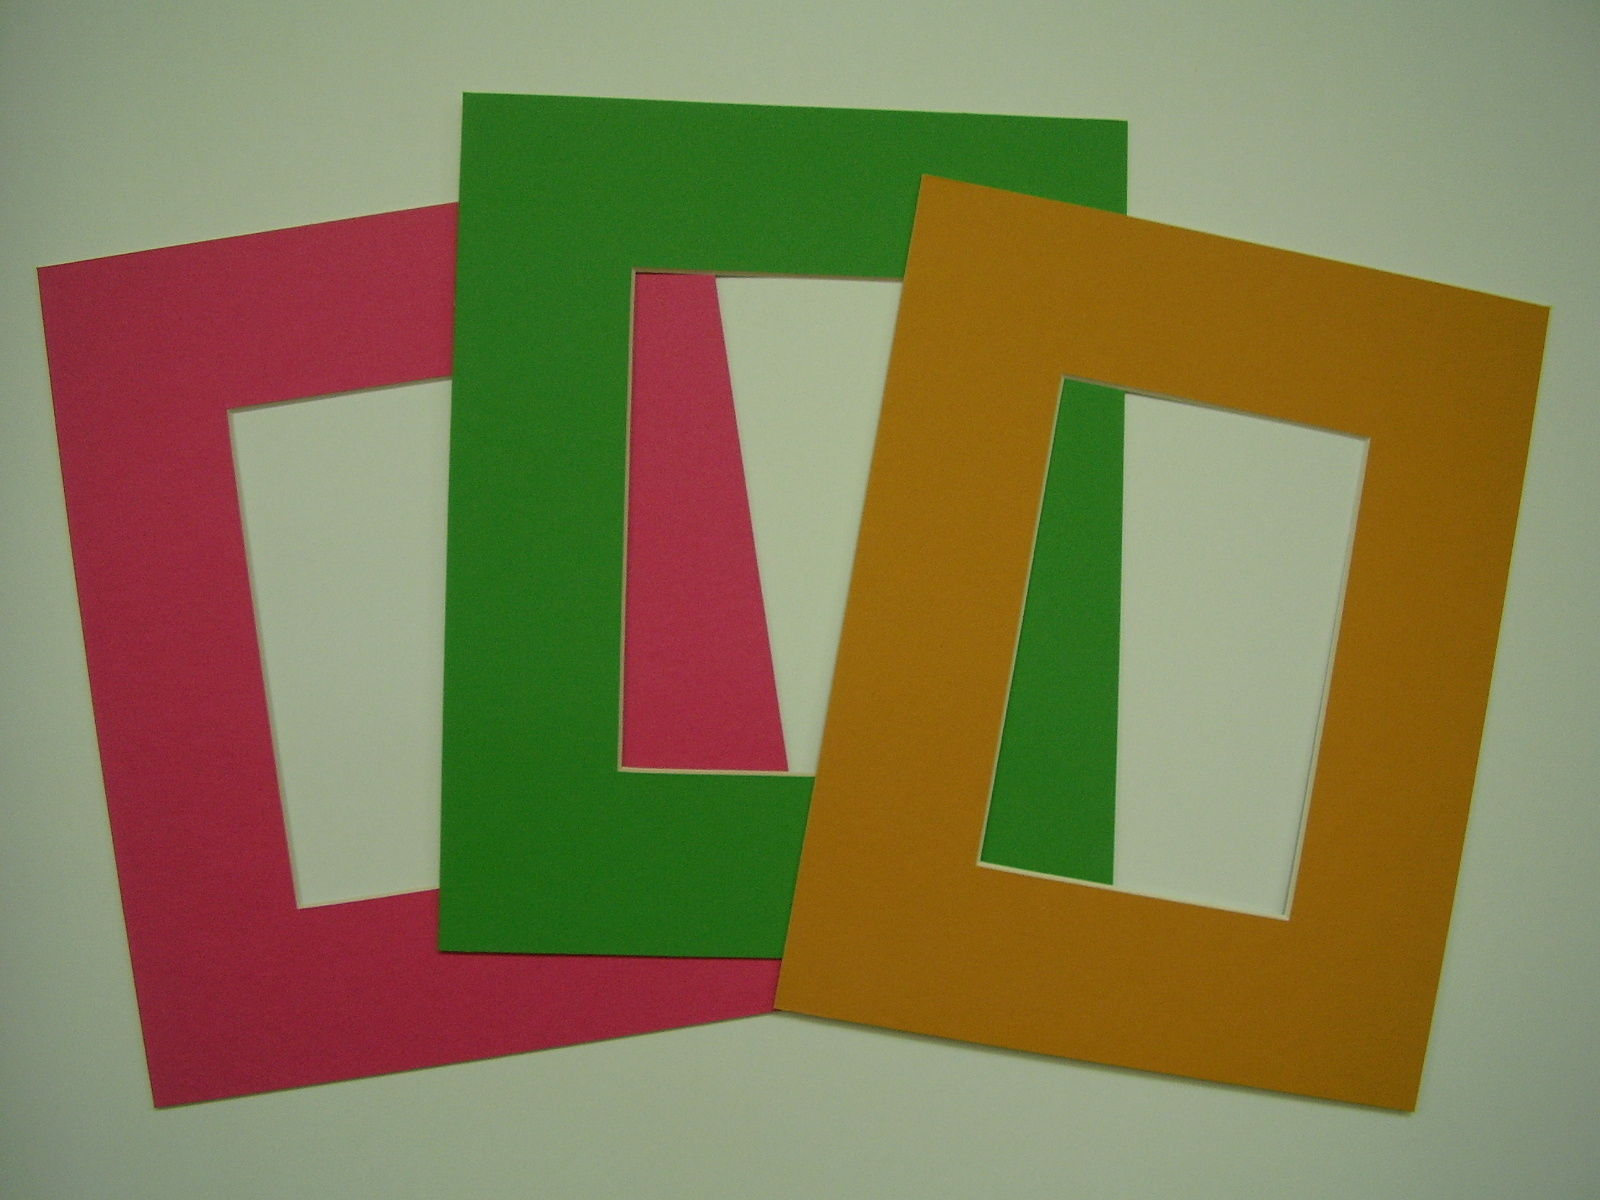 Picture Framing Single Mats colors 8x10 for 4x6 photo green gold pink SET OF 3 - $6.00